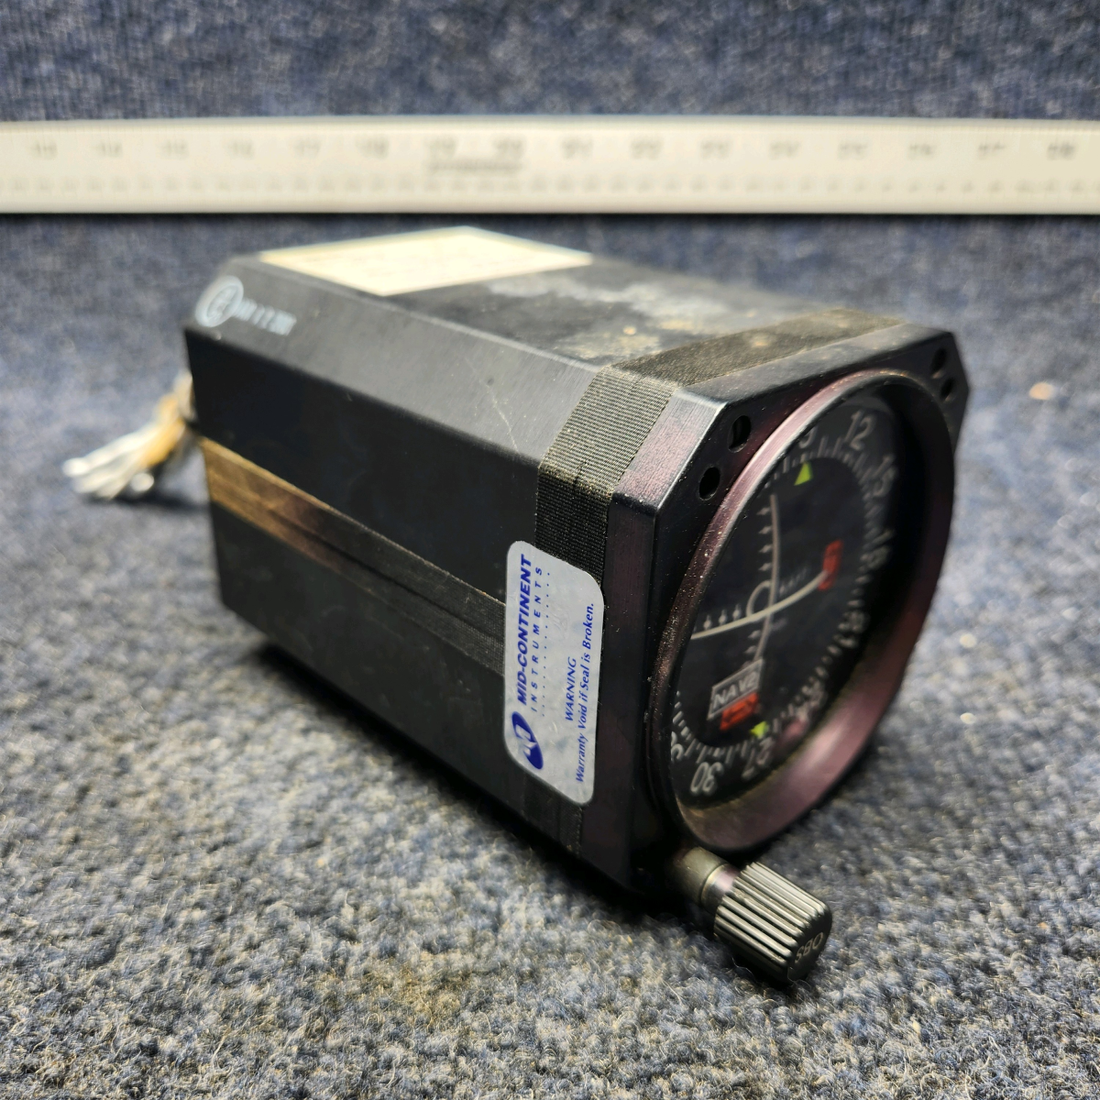 Used aircraft parts for sale, 013-00049-01 PIPIR PA32RT-300 GARMIN GI-106A COURSE DEVIATION INDICATOR (USED) S/N A21155